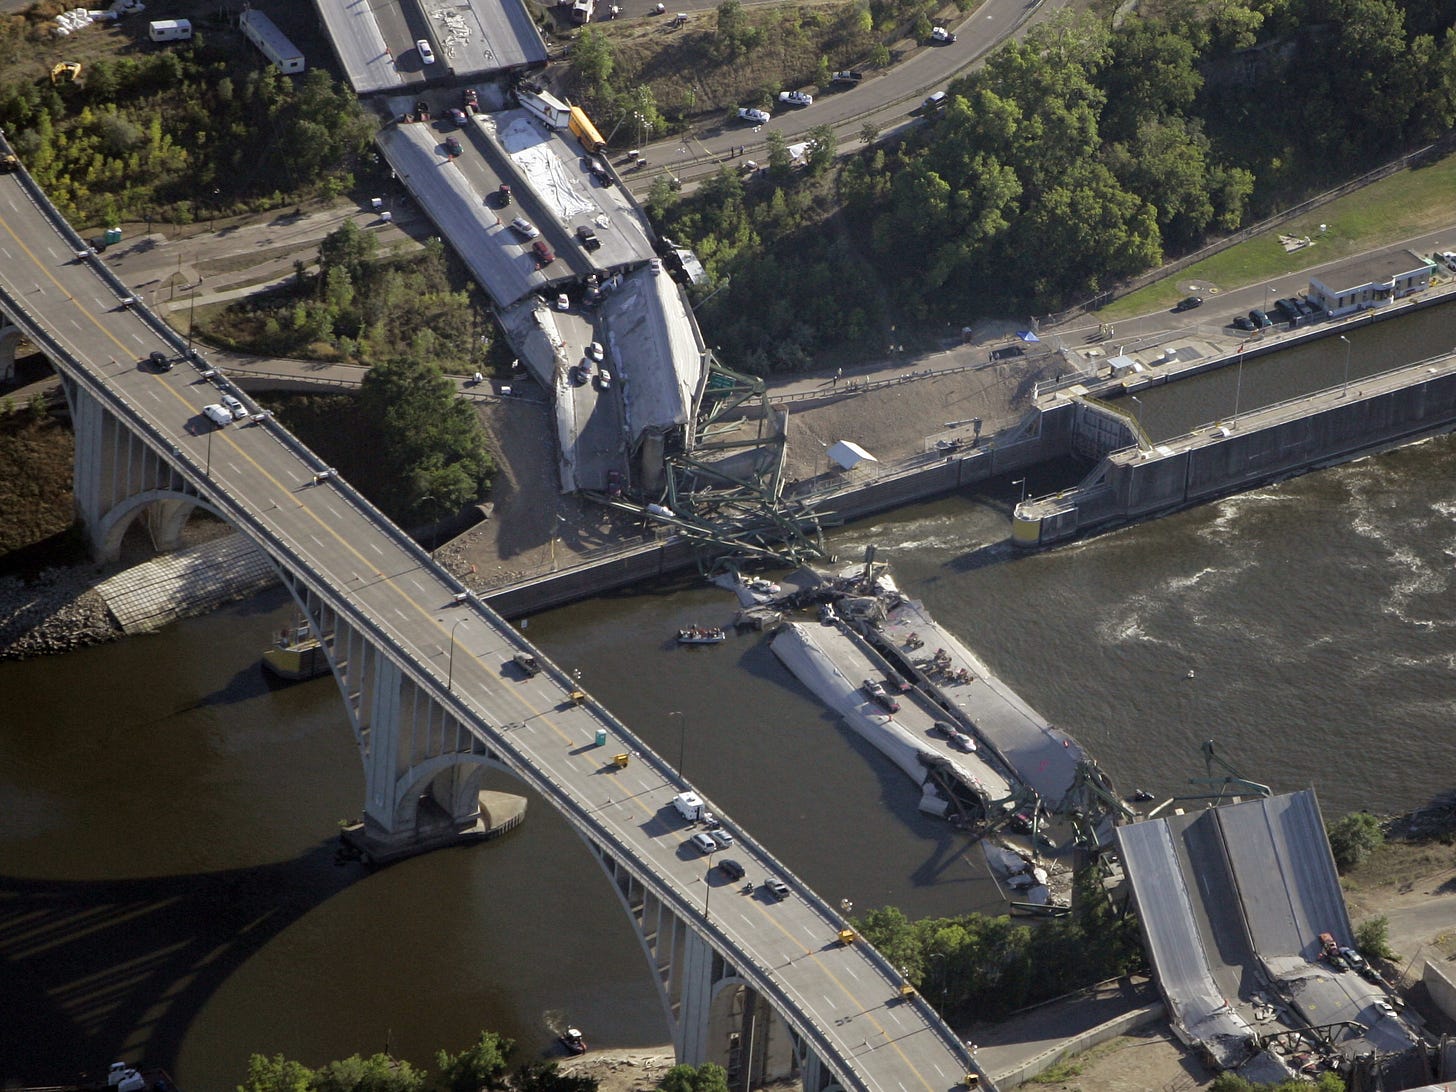 An image of the 35-W Bridge Collapse over the Mississippi River